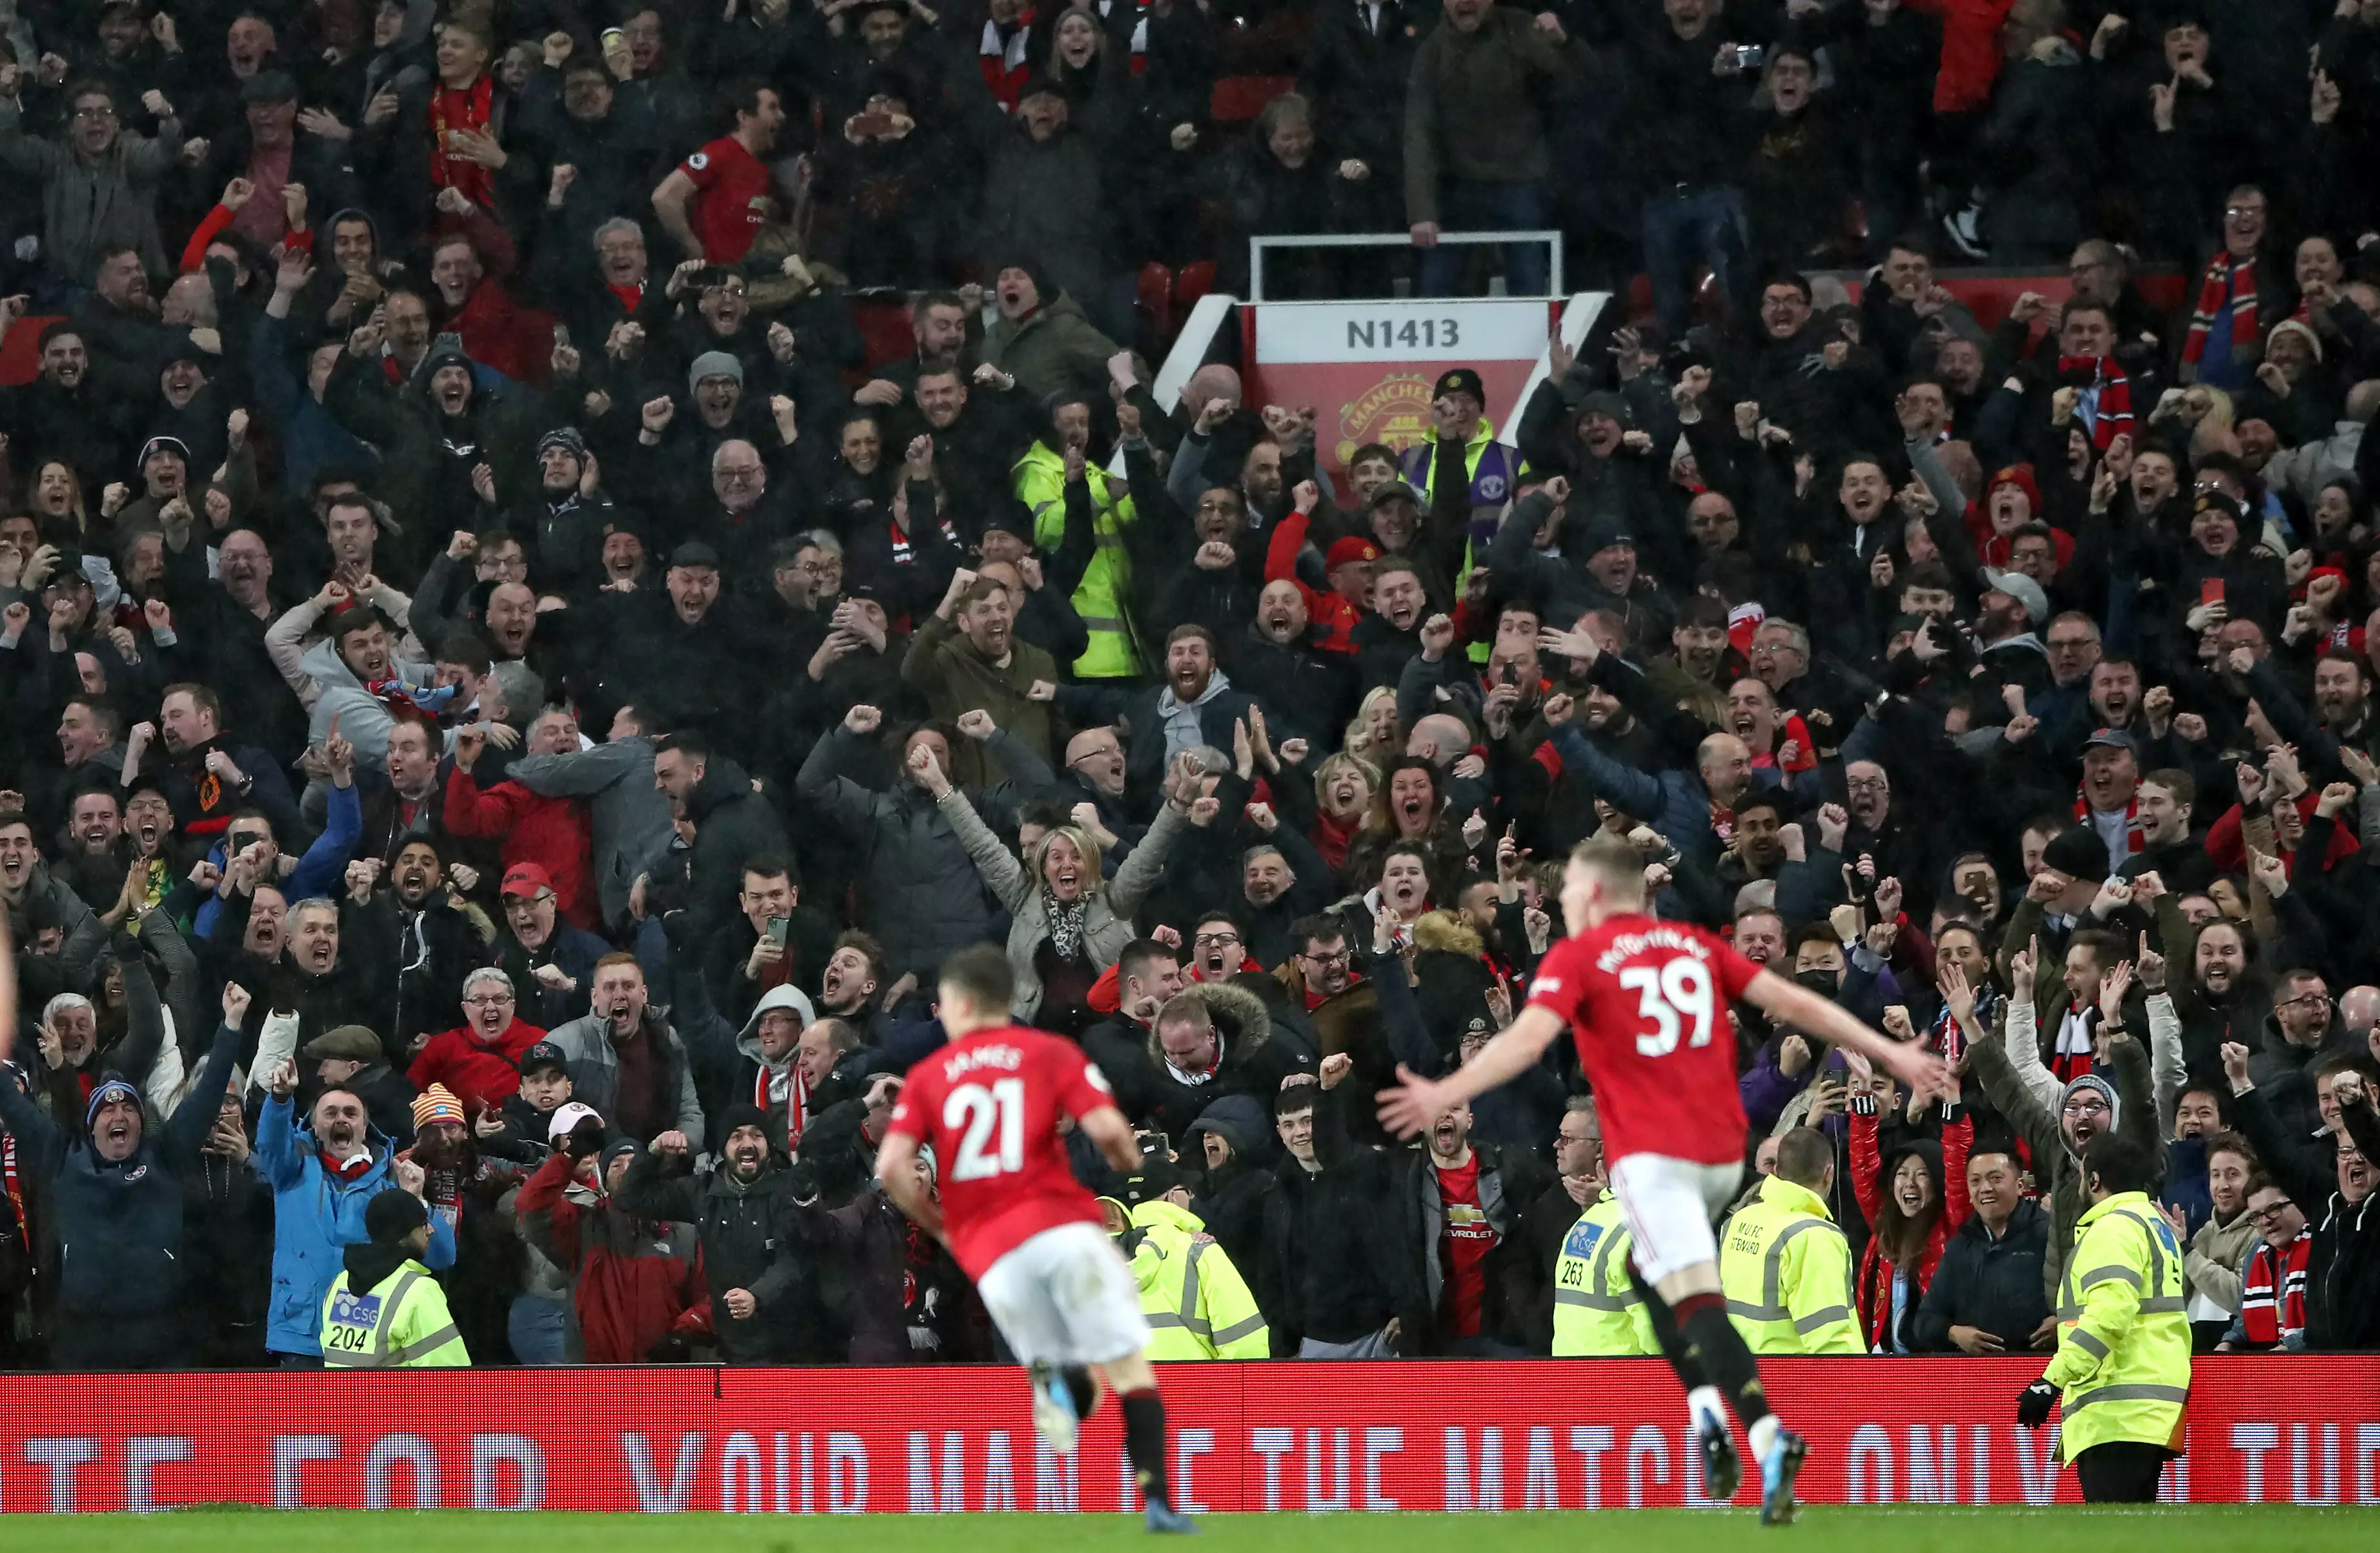 The Manchester derby wouldn't have been the same without fans. Image: PA Images